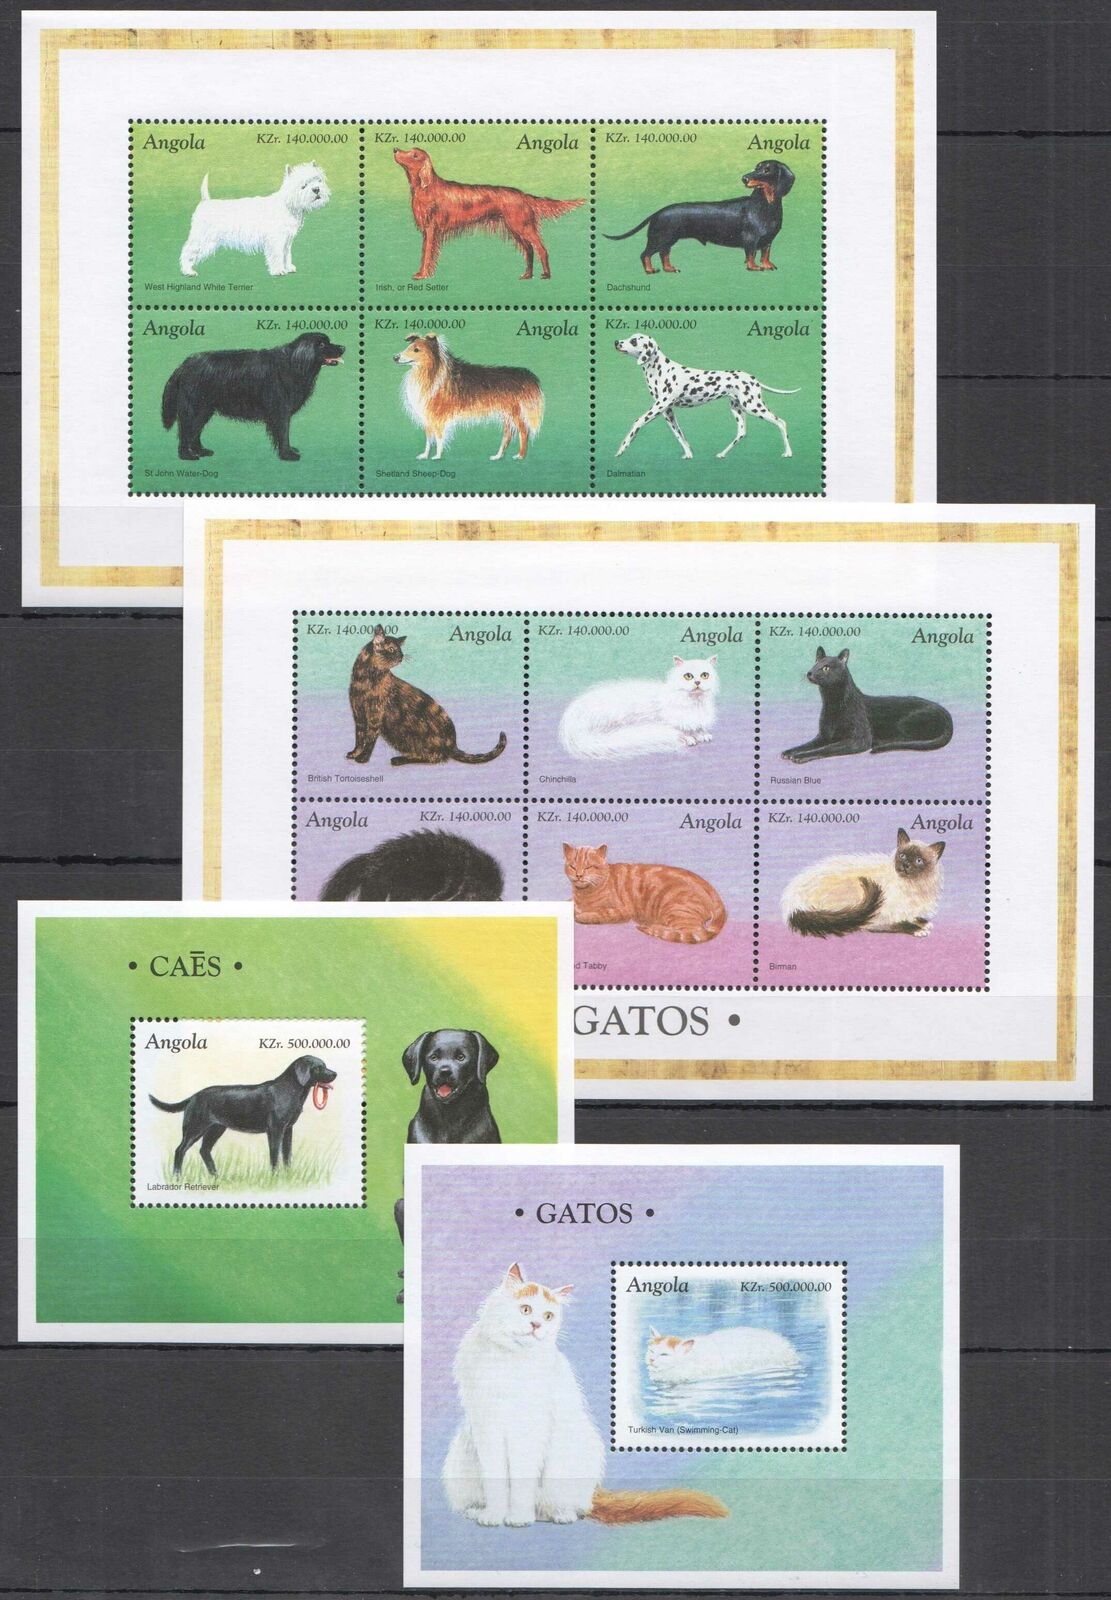 Ab0624 Angola Fauna Domestic Animals Pets Dogs & Cats 2bl+2kb Mnh Stamps